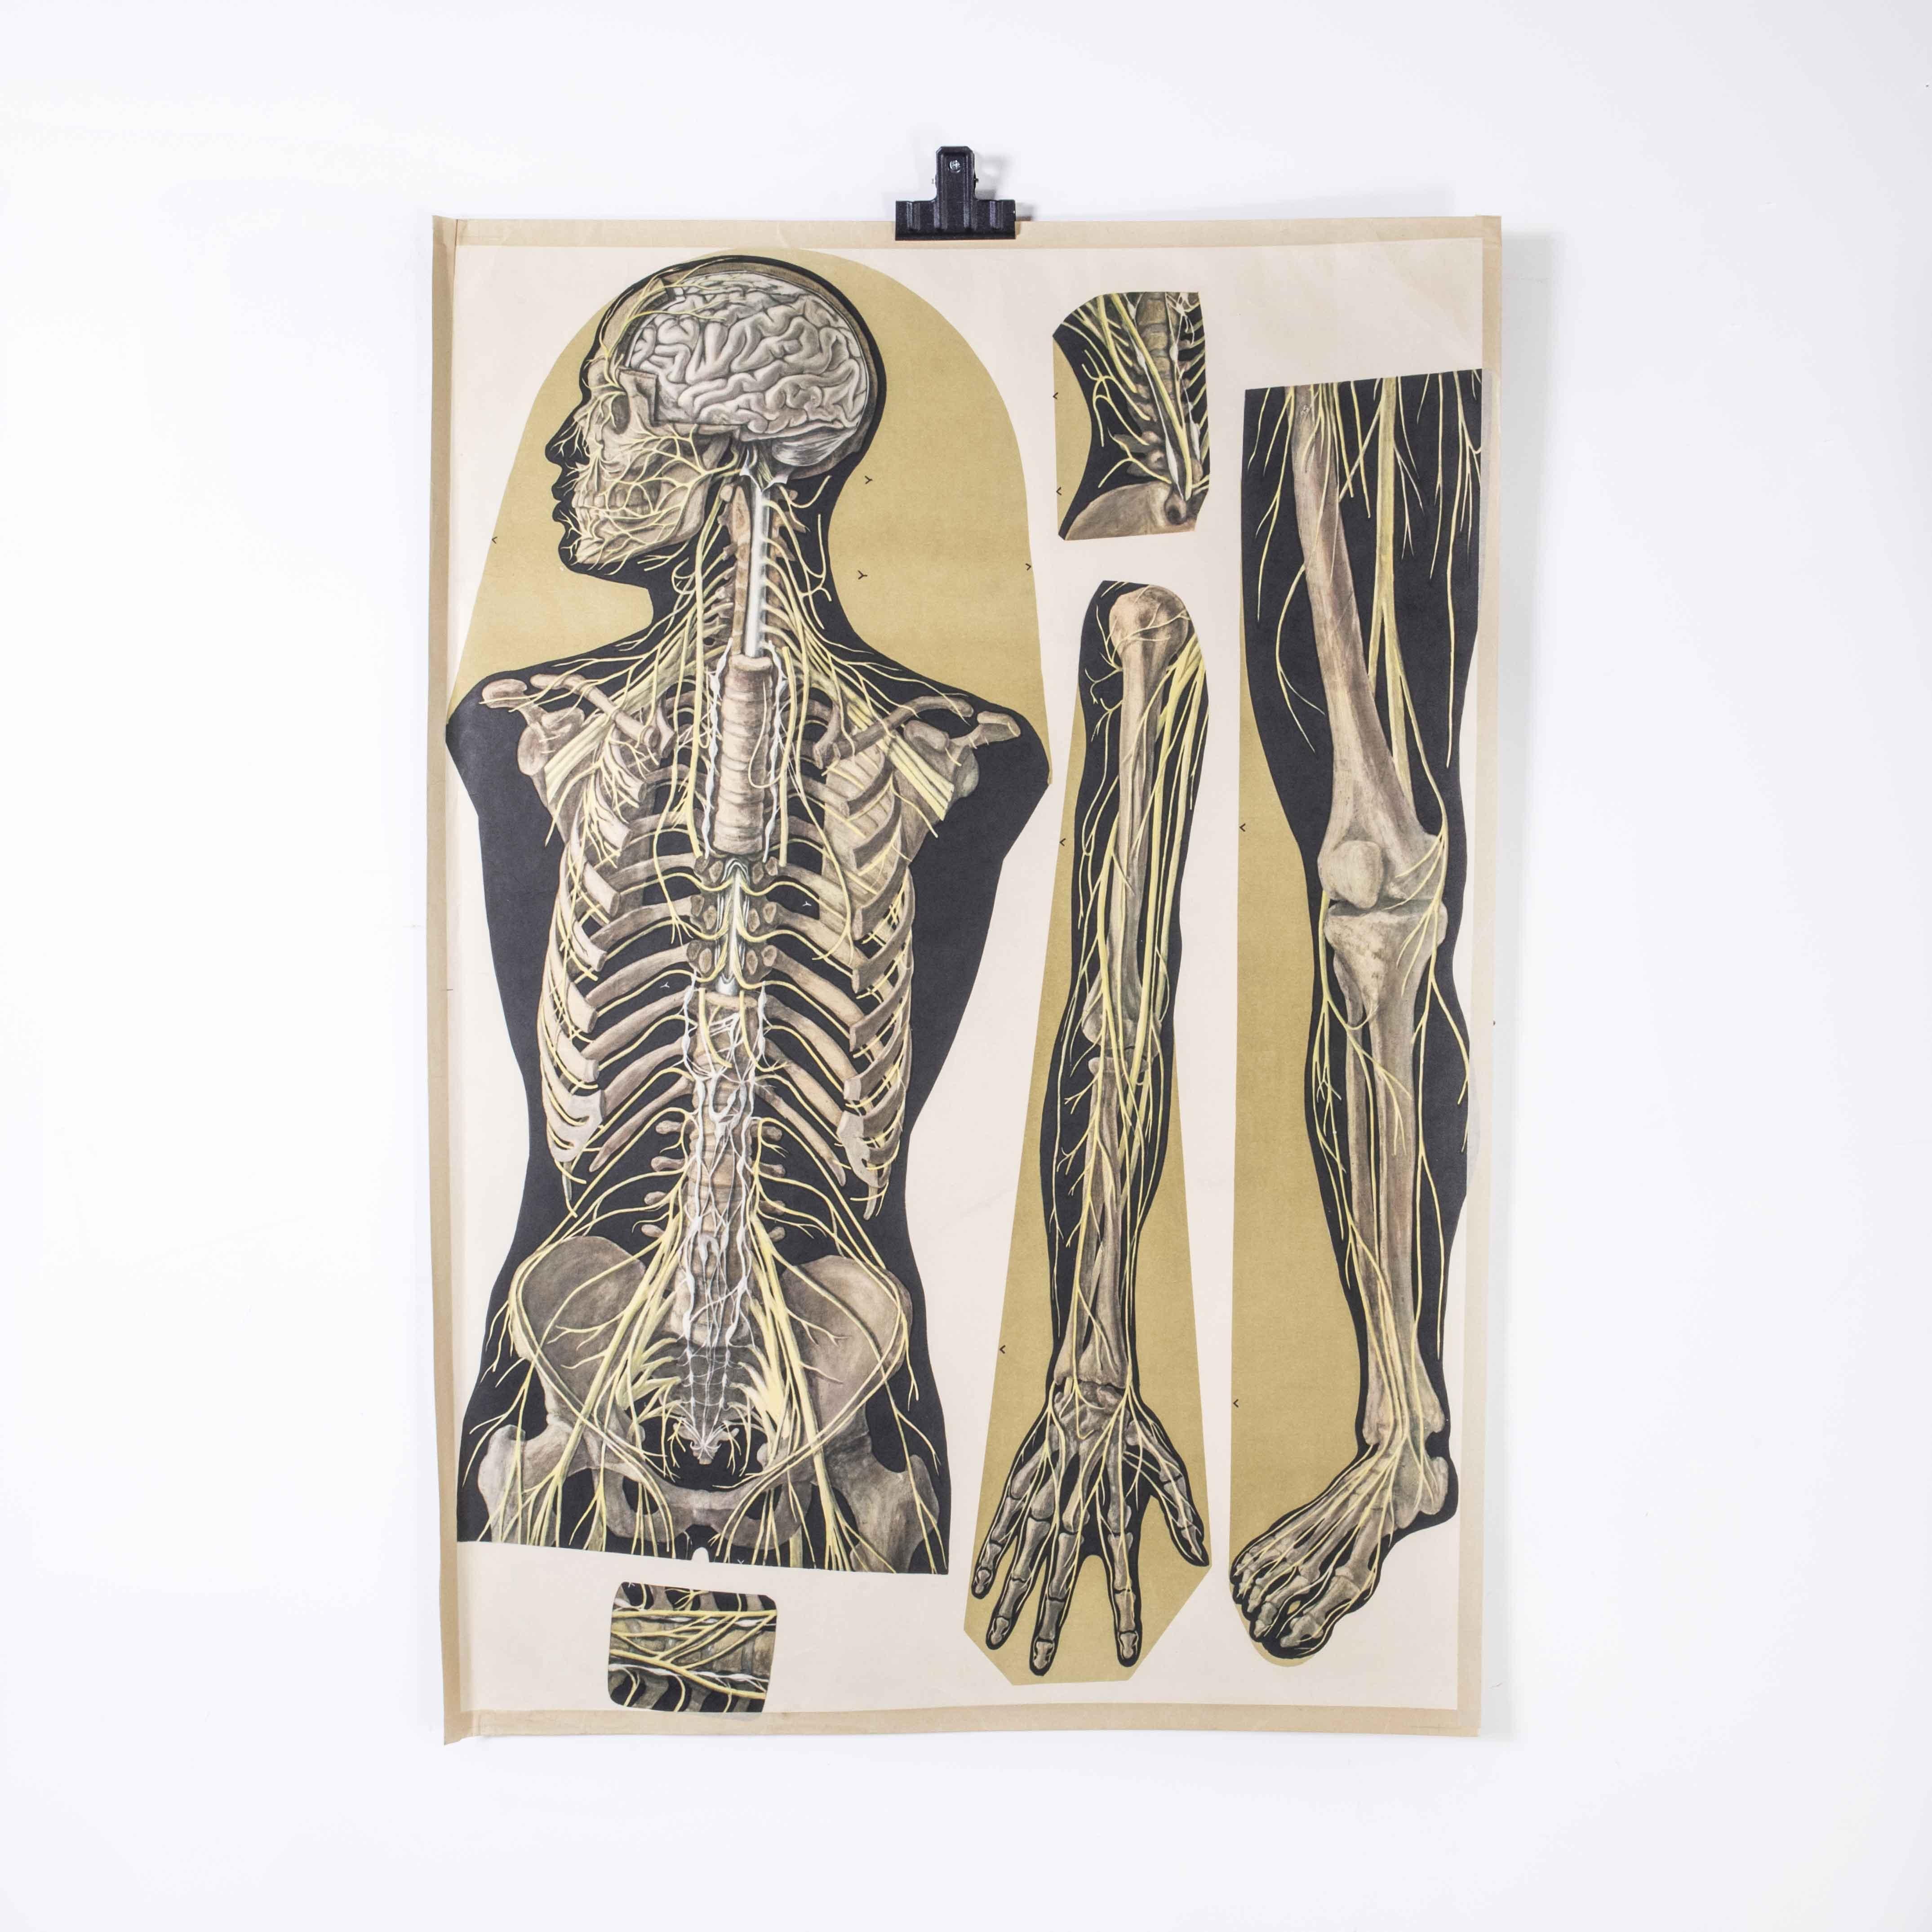 Early 20th century human skeleton educational poster
Early 20th century human skeleton educational poster. Early 20th century Czechoslovakian educational human anatomy chart. A rare and vintage wall chart from the Czech Republic illustrating the